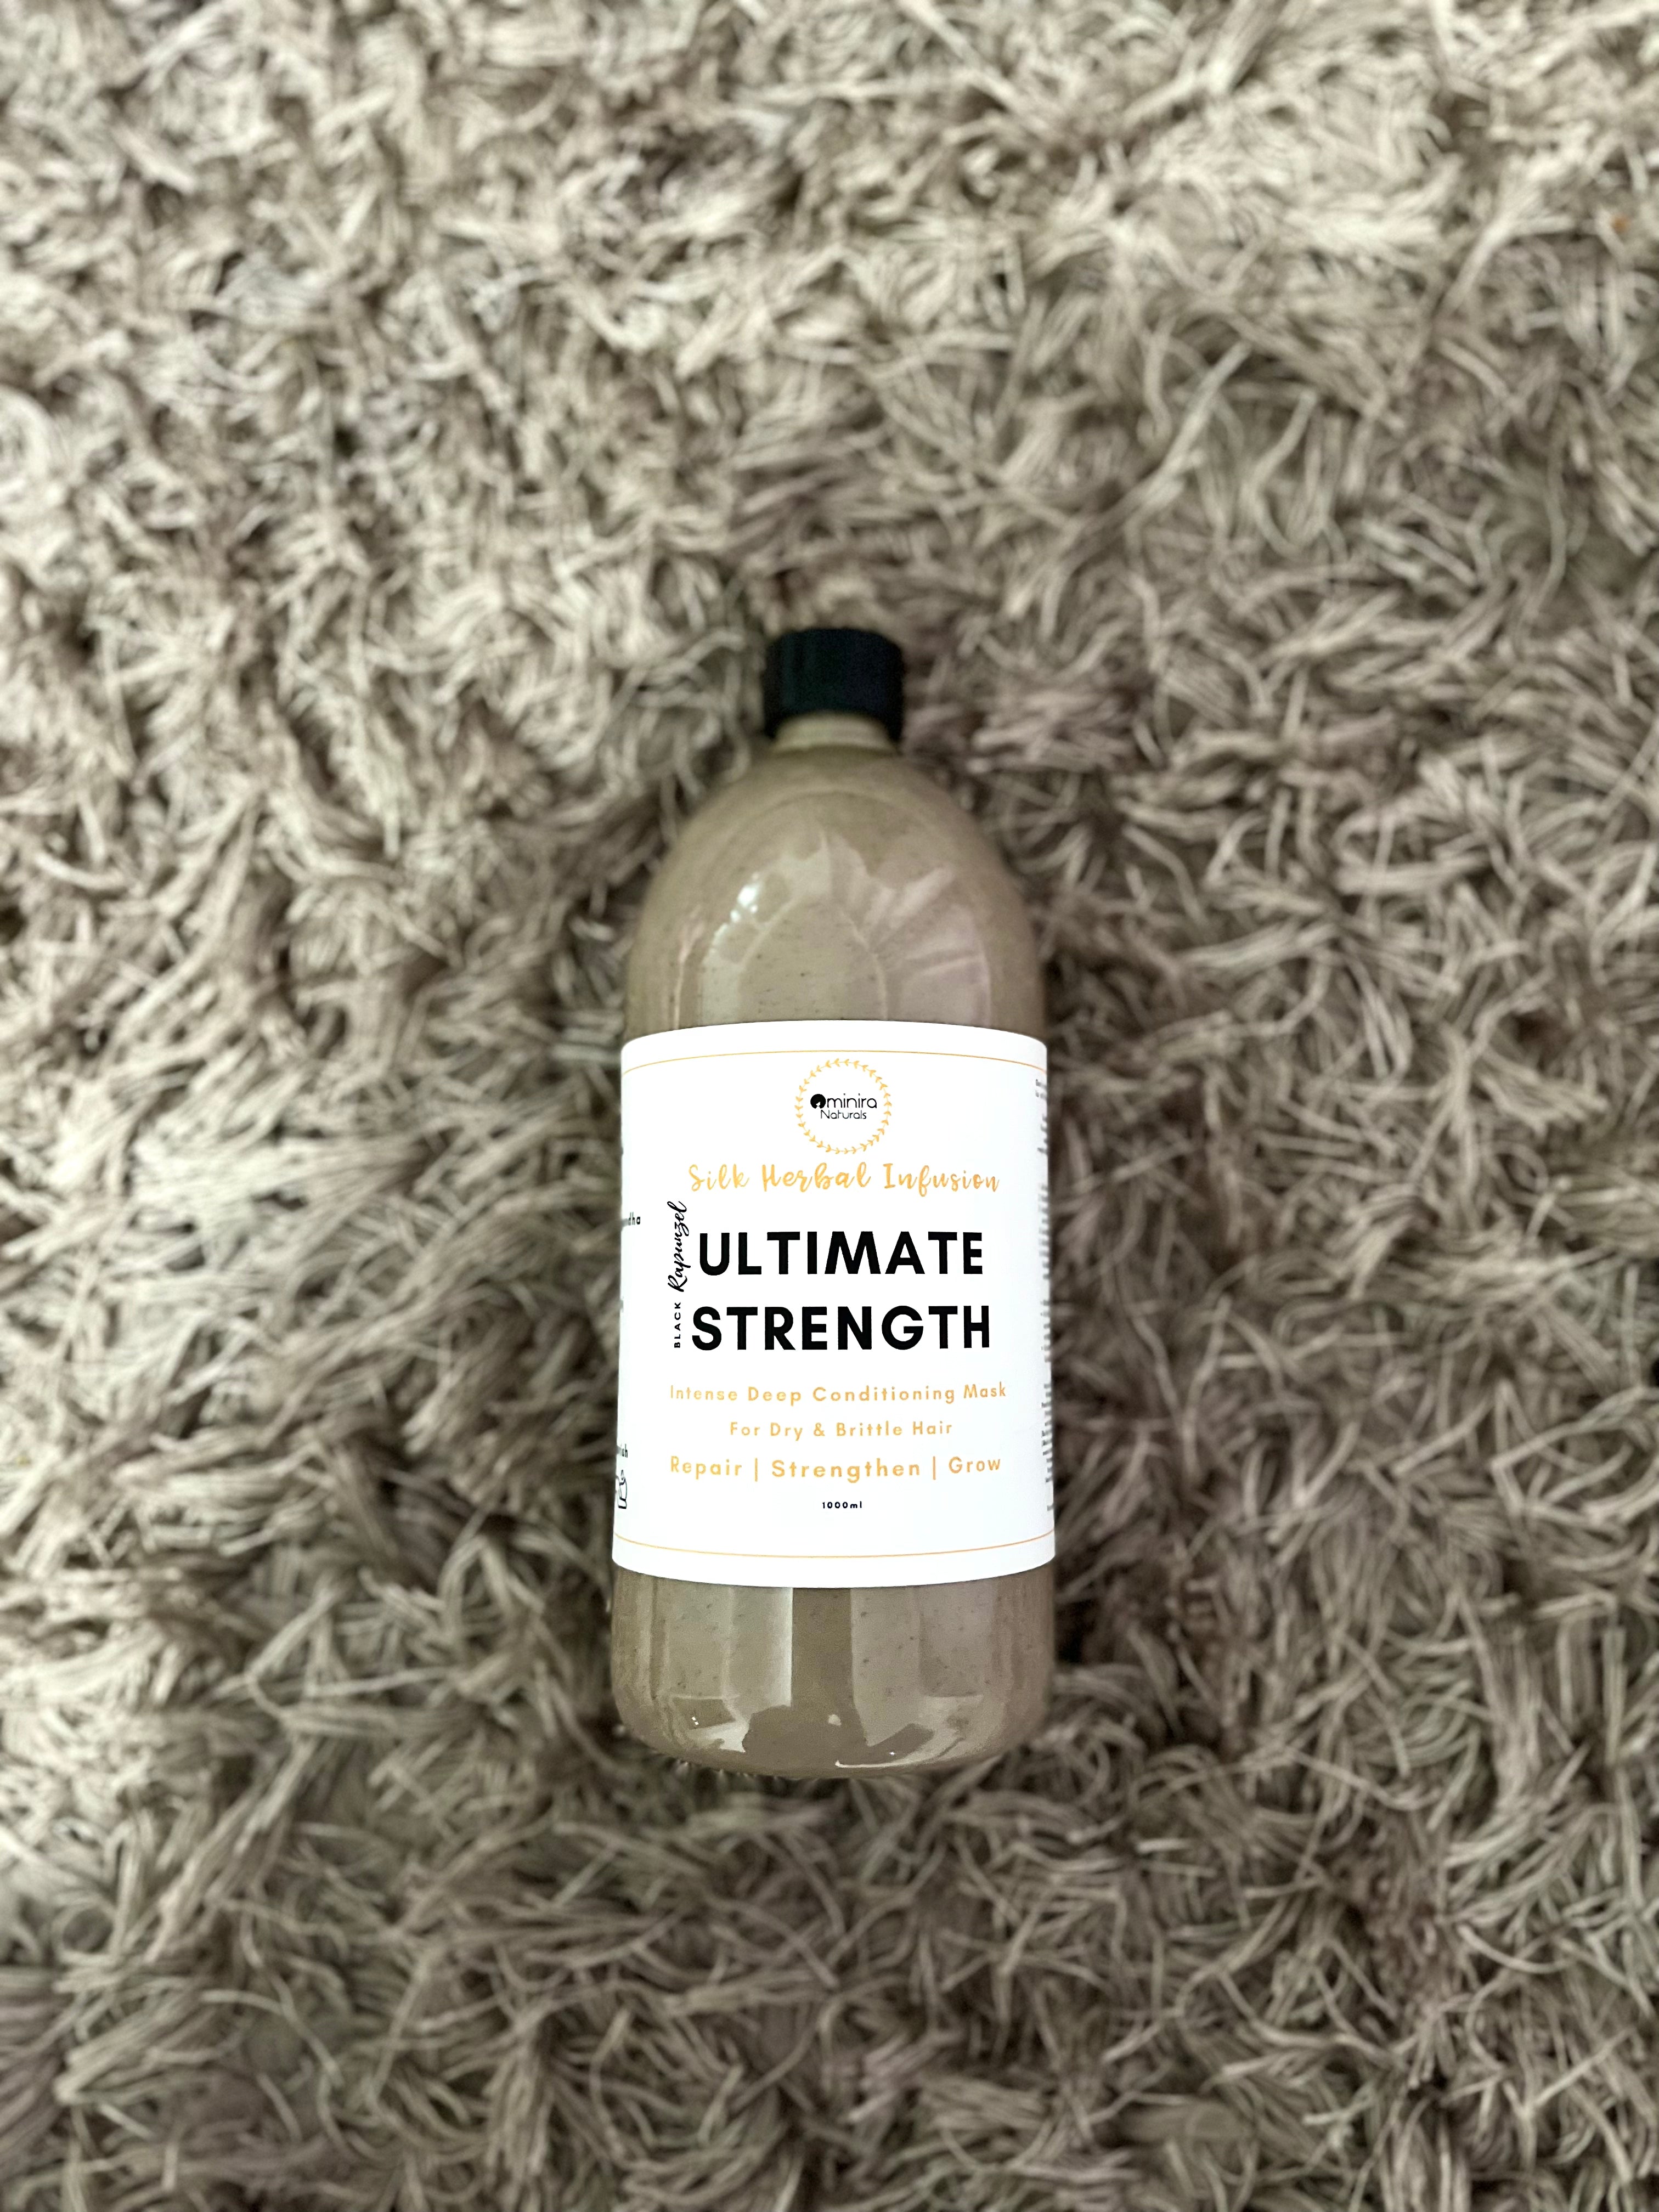 Silk Herbal Infusion - Ultimate Strength Intense Deep Conditioning Mask